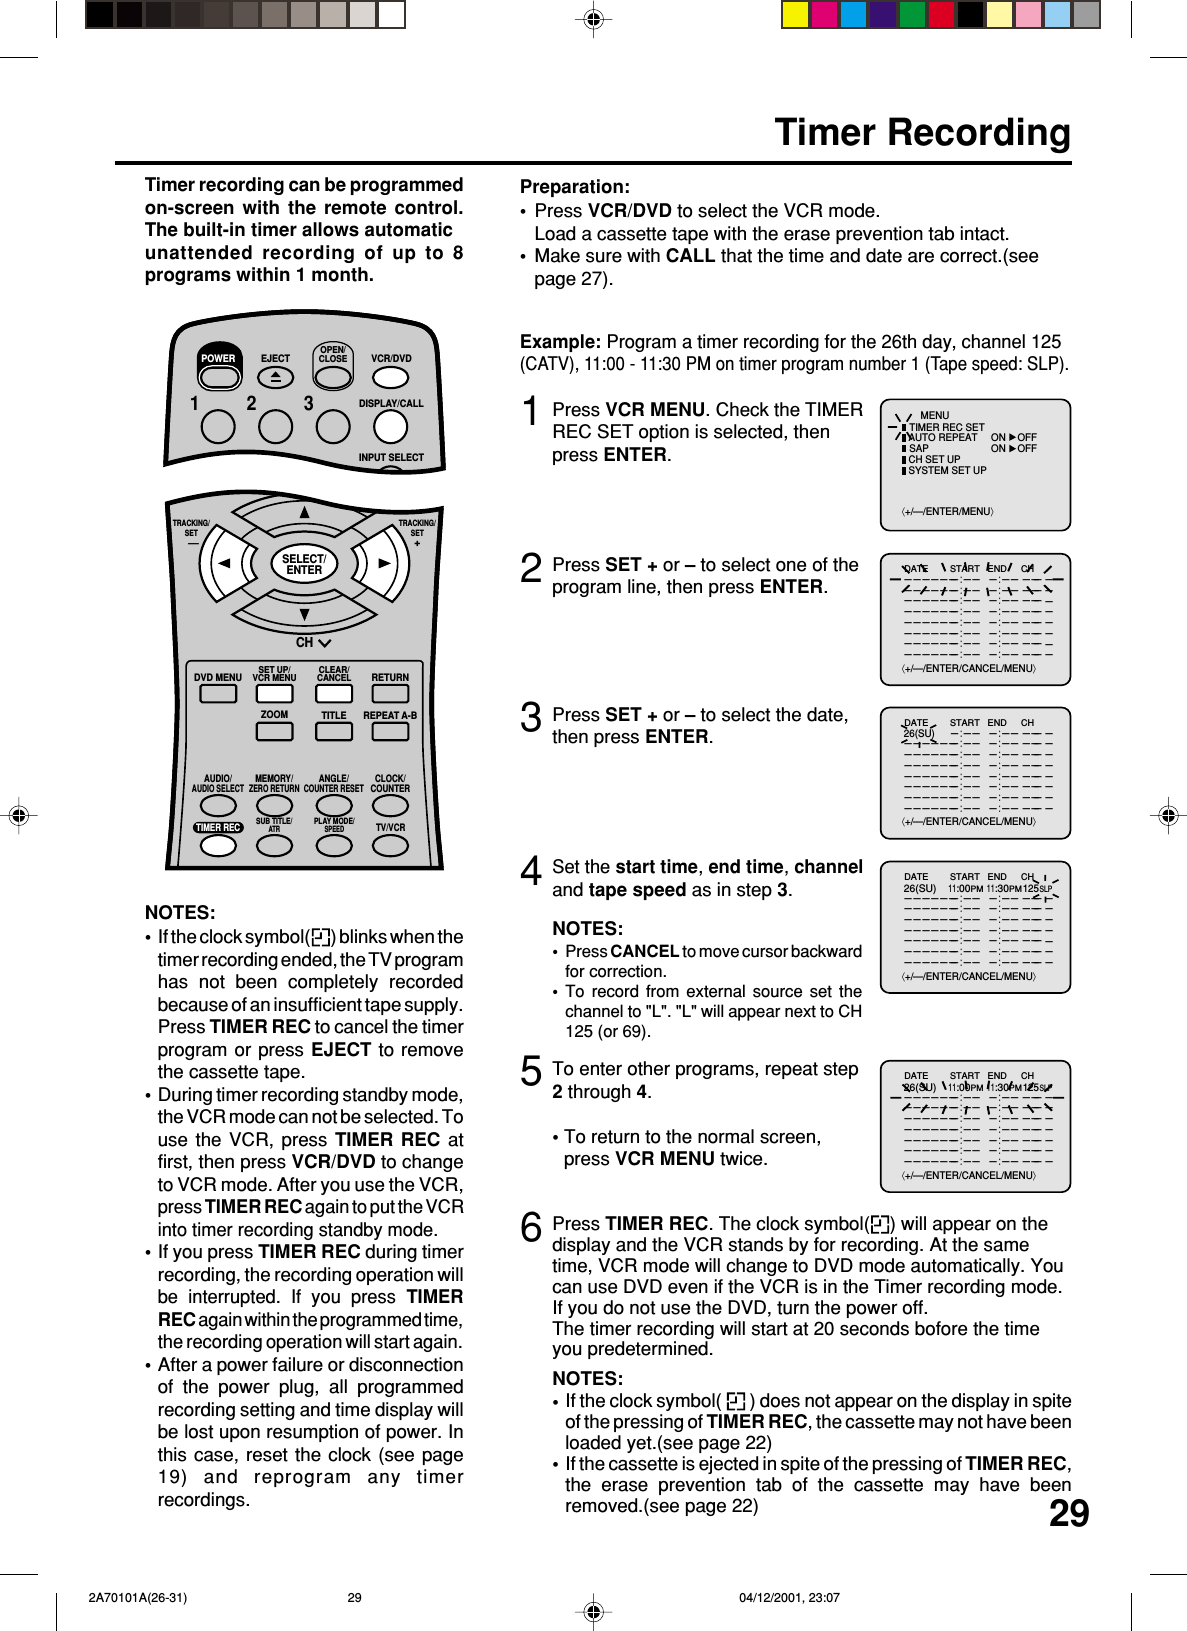 293Timer RecordingPress VCR MENU. Check the TIMERREC SET option is selected, thenpress ENTER.Press SET + or – to select the date,then press ENTER.12Press SET + or – to select one of theprogram line, then press ENTER.4Press VCR/DVD to select the VCR mode.Load a cassette tape with the erase prevention tab intact.Make sure with CALL that the time and date are correct.(seepage 27).Preparation:••Timer recording can be programmedon-screen with the remote control.The built-in timer allows automaticunattended recording of up to 8programs within 1 month.Set the start time, end time, channeland tape speed as in step 3.Example: Program a timer recording for the 26th day, channel 125(CATV), 11:00 - 11:30 PM on timer program number 1 (Tape speed: SLP).NOTES:Press CANCEL to move cursor backwardfor correction.To record from external source set thechannel to &quot;L&quot;. &quot;L&quot; will appear next to CH125 (or 69).••5To enter other programs, repeat step2 through 4.• To return to the normal screen,press VCR MENU twice.6Press TIMER REC. The clock symbol( ) will appear on thedisplay and the VCR stands by for recording. At the sametime, VCR mode will change to DVD mode automatically. Youcan use DVD even if the VCR is in the Timer recording mode.If you do not use the DVD, turn the power off.The timer recording will start at 20 seconds bofore the timeyou predetermined.NOTES:If the clock symbol(   ) does not appear on the display in spiteof the pressing of TIMER REC, the cassette may not have beenloaded yet.(see page 22)If the cassette is ejected in spite of the pressing of TIMER REC,the erase prevention tab of the cassette may have beenremoved.(see page 22)••NOTES:If the clock symbol( ) blinks when thetimer recording ended, the TV programhas not been completely recordedbecause of an insufficient tape supply.Press TIMER REC to cancel the timerprogram or press EJECT to removethe cassette tape.During timer recording standby mode,the VCR mode can not be selected. Touse the VCR, press TIMER REC atfirst, then press VCR/DVD to changeto VCR mode. After you use the VCR,press TIMER REC again to put the VCRinto timer recording standby mode.If you press TIMER REC during timerrecording, the recording operation willbe interrupted. If you press TIMERREC again within the programmed time,the recording operation will start again.After a power failure or disconnectionof the power plug, all programmedrecording setting and time display willbe lost upon resumption of power. Inthis case, reset the clock (see page19) and reprogram any timerrecordings.••••⟨+/—/ENTER/MENU⟩MENUTIMER REC SETAUTO REPEAT ON OFFON OFFSAPCH SET UPSYSTEM SET UP⟨+/—/ENTER/CANCEL/MENU⟩DATE START END CH———————:—— —:—— ——————————:—— —:—— ——————————:—— —:—— ——————————:—— —:—— ——————————:—— —:—— ——————————:—— —:—— ——————————:—— —:—— ——————————:—— —:—— ———————————⟨+/—/ENTER/CANCEL/MENU⟩DATE START END CH———————:—— —:—— ————:—— —:—— ——————————:—— —:—— ——————————:—— —:—— ——————————:—— —:—— ——————————:—— —:—— ——————————:—— —:—— ——————————:—— —:—— ——————————— 26(SU)⟨+/—/ENTER/CANCEL/MENU⟩DATE START END CH———————:—— —:—— ——————————:—— —:—— ——————————:—— —:—— ——————————:—— —:—— ——————————:—— —:—— ——————————:—— —:—— ——————————:—— —:—— ——————————26(SU)11:00PM11:30PM125SLP⟨+/—/ENTER/CANCEL/MENU⟩DATE START END CH———————:—— —:—— ——————————:—— —:—— ——————————:—— —:—— ——————————:—— —:—— ——————————:—— —:—— ——————————:—— —:—— ——————————:—— —:—— ——————————26(SU)11:00PM11:30PM125SLPCHDVD MENU RETURNSET UP/VCR MENU CLEAR/CANCELANGLE/COUNTER RESETCLOCK/COUNTERPLAY MODE/SPEEDAUDIO/AUDIO SELECTTV/VCRZOOMTRACKING/SET—TRACKING/SET+TITLE REPEAT A-BTIMER REC SUB TITLE/ATRSELECT/ENTERMEMORY/ZERO RETURN123EJECTOPEN/CLOSEVCR/DVDDISPLAY/CALLINPUT SELECT456POWER 2A70101A(26-31) 04/12/2001, 23:0729